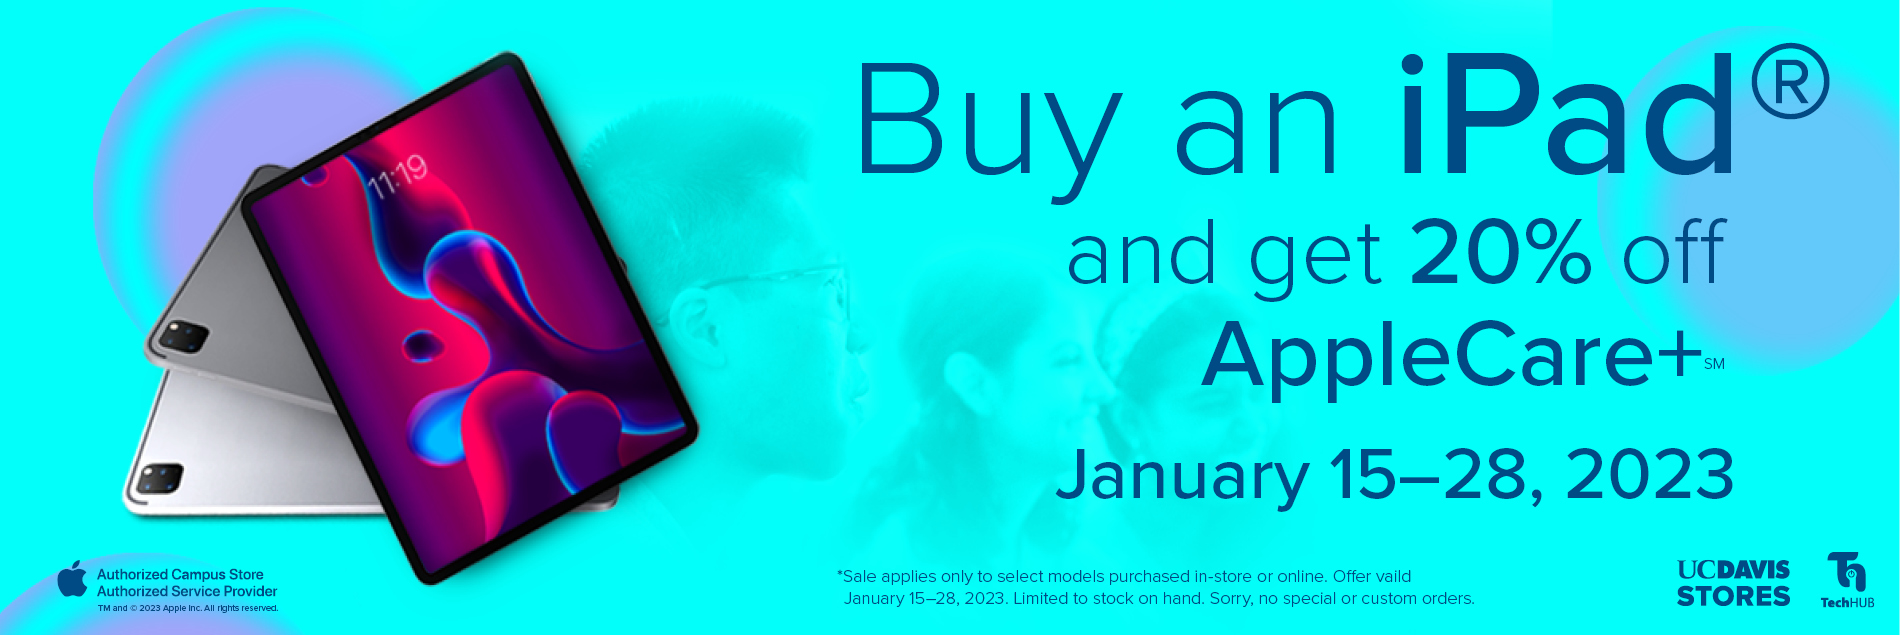 Buy an iPad and get 20% off AppleCare+. January 15 - 28, 2023